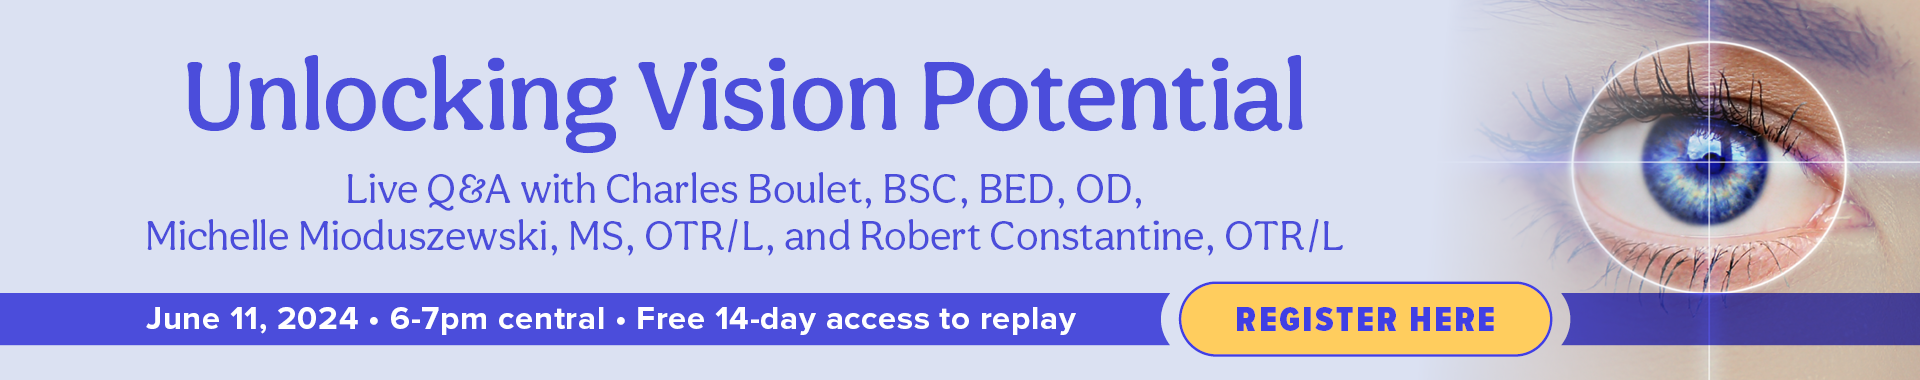 FREE ONLINE EVENT! |Unlocking Vision Potential: Live Q&A with Charles Boulet, Michelle Mioduszewski & Robert Constantine